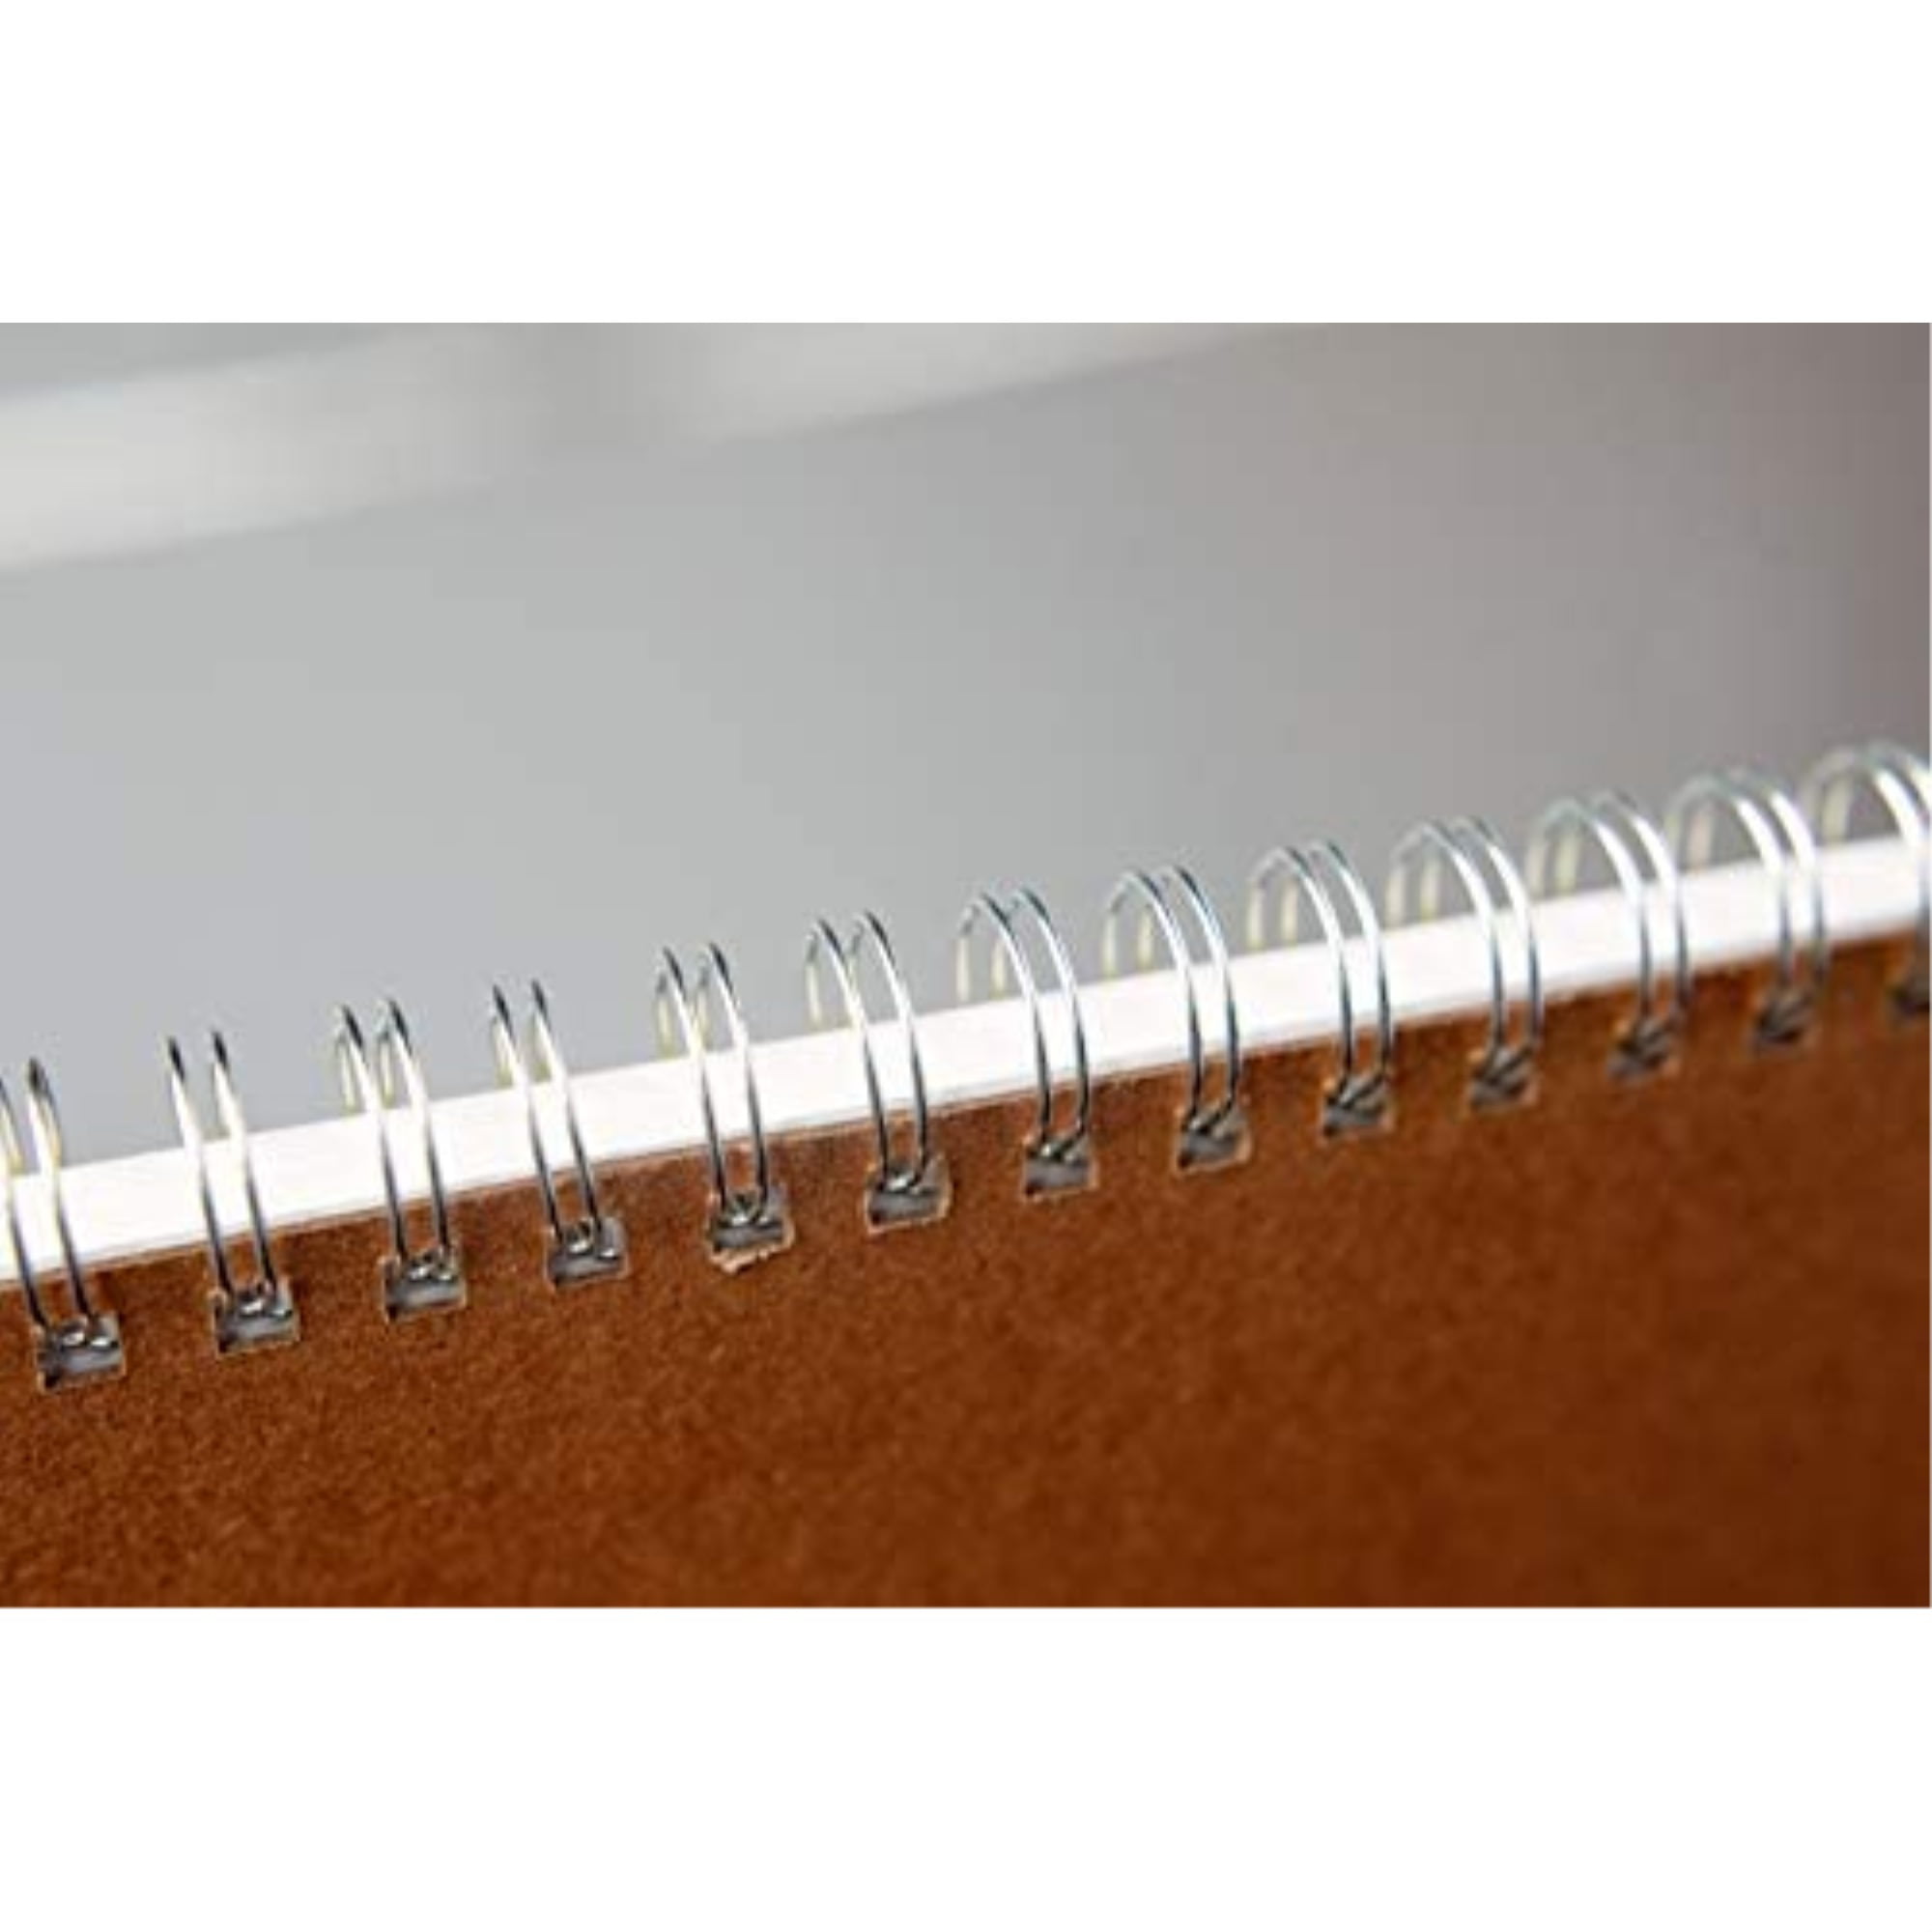 12 Pack: Strathmore® 300 Series Wired Drawing Paper Pad, 50 Sheets